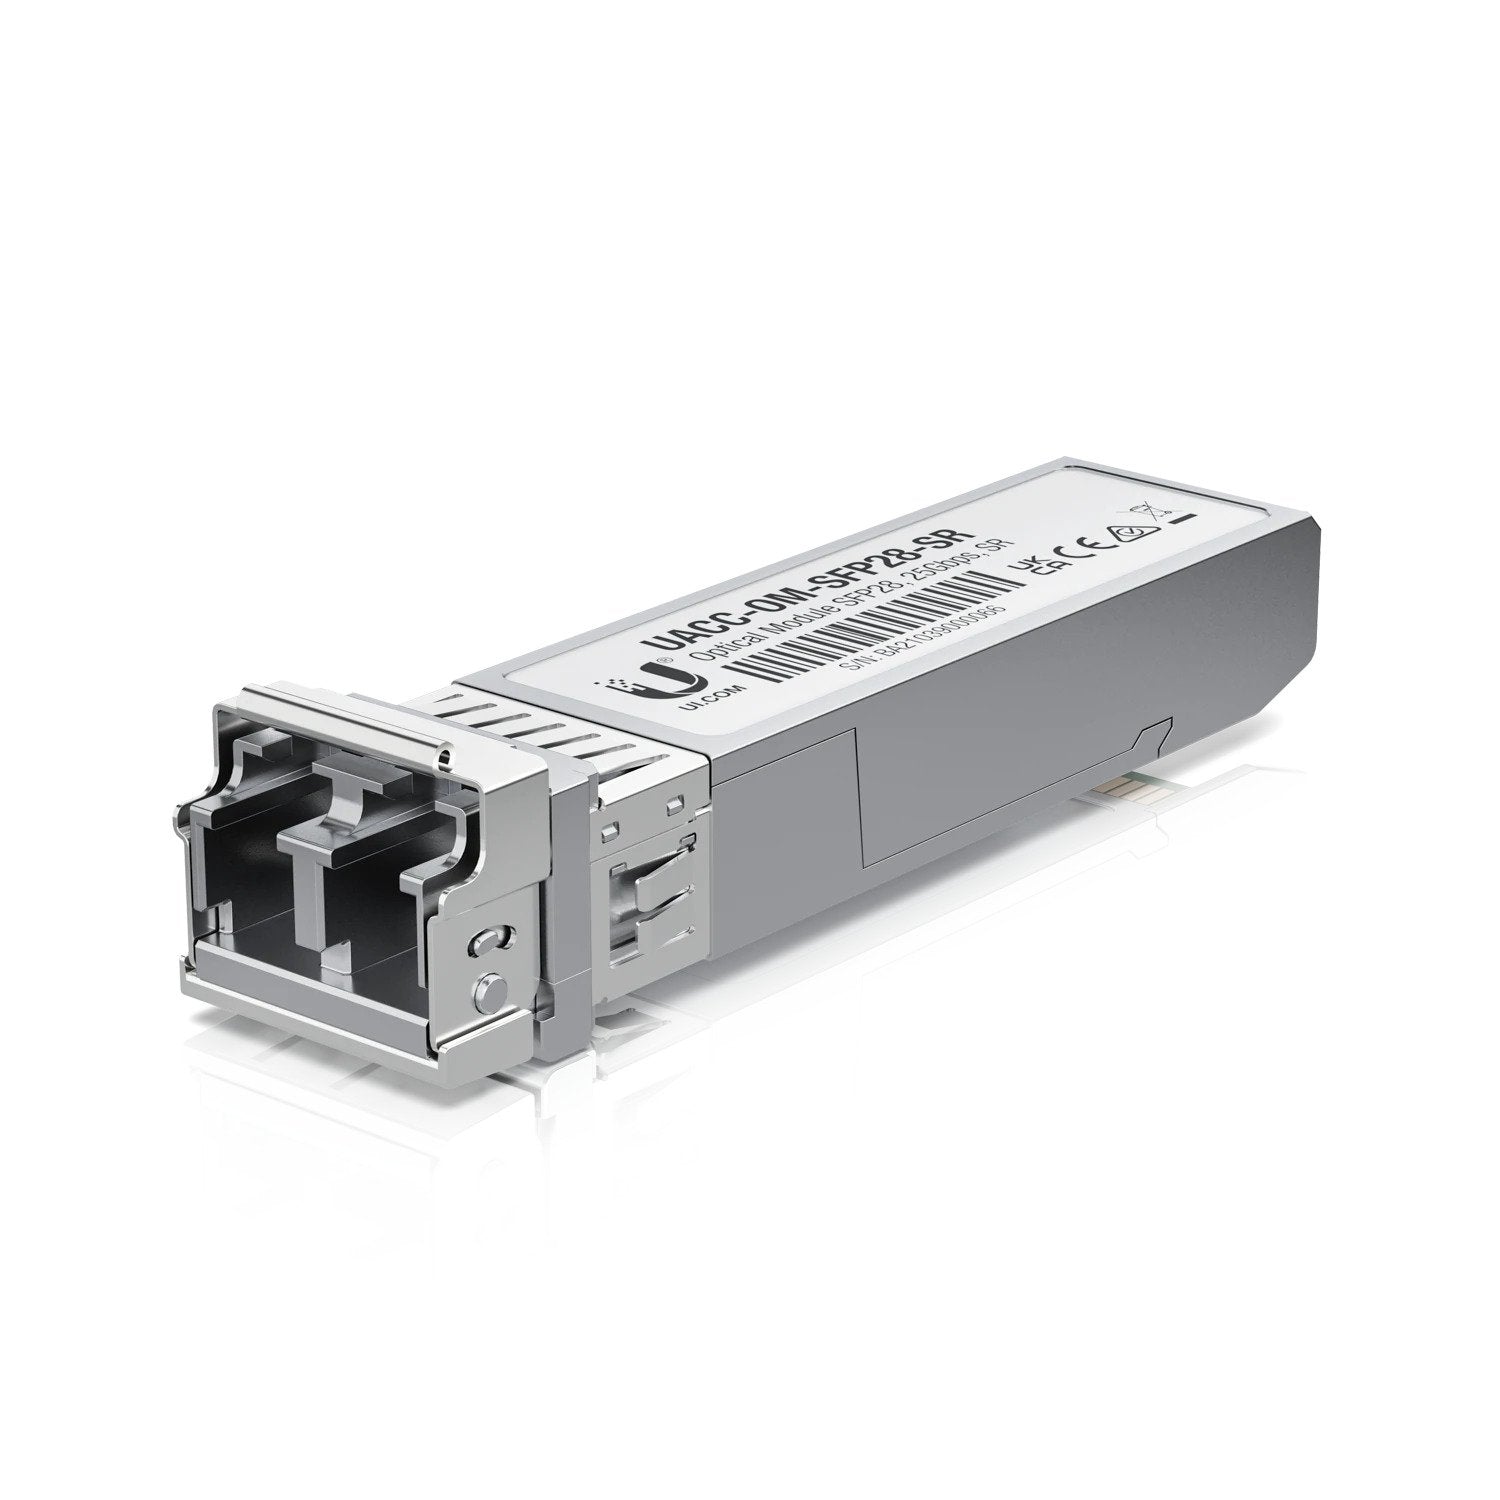 Ubiquiti 25 Gbps Multi-Mode Optical Module, Short-range, SFP28-compatible Optical Transceiver Module,Supports Connections Up To 100 m